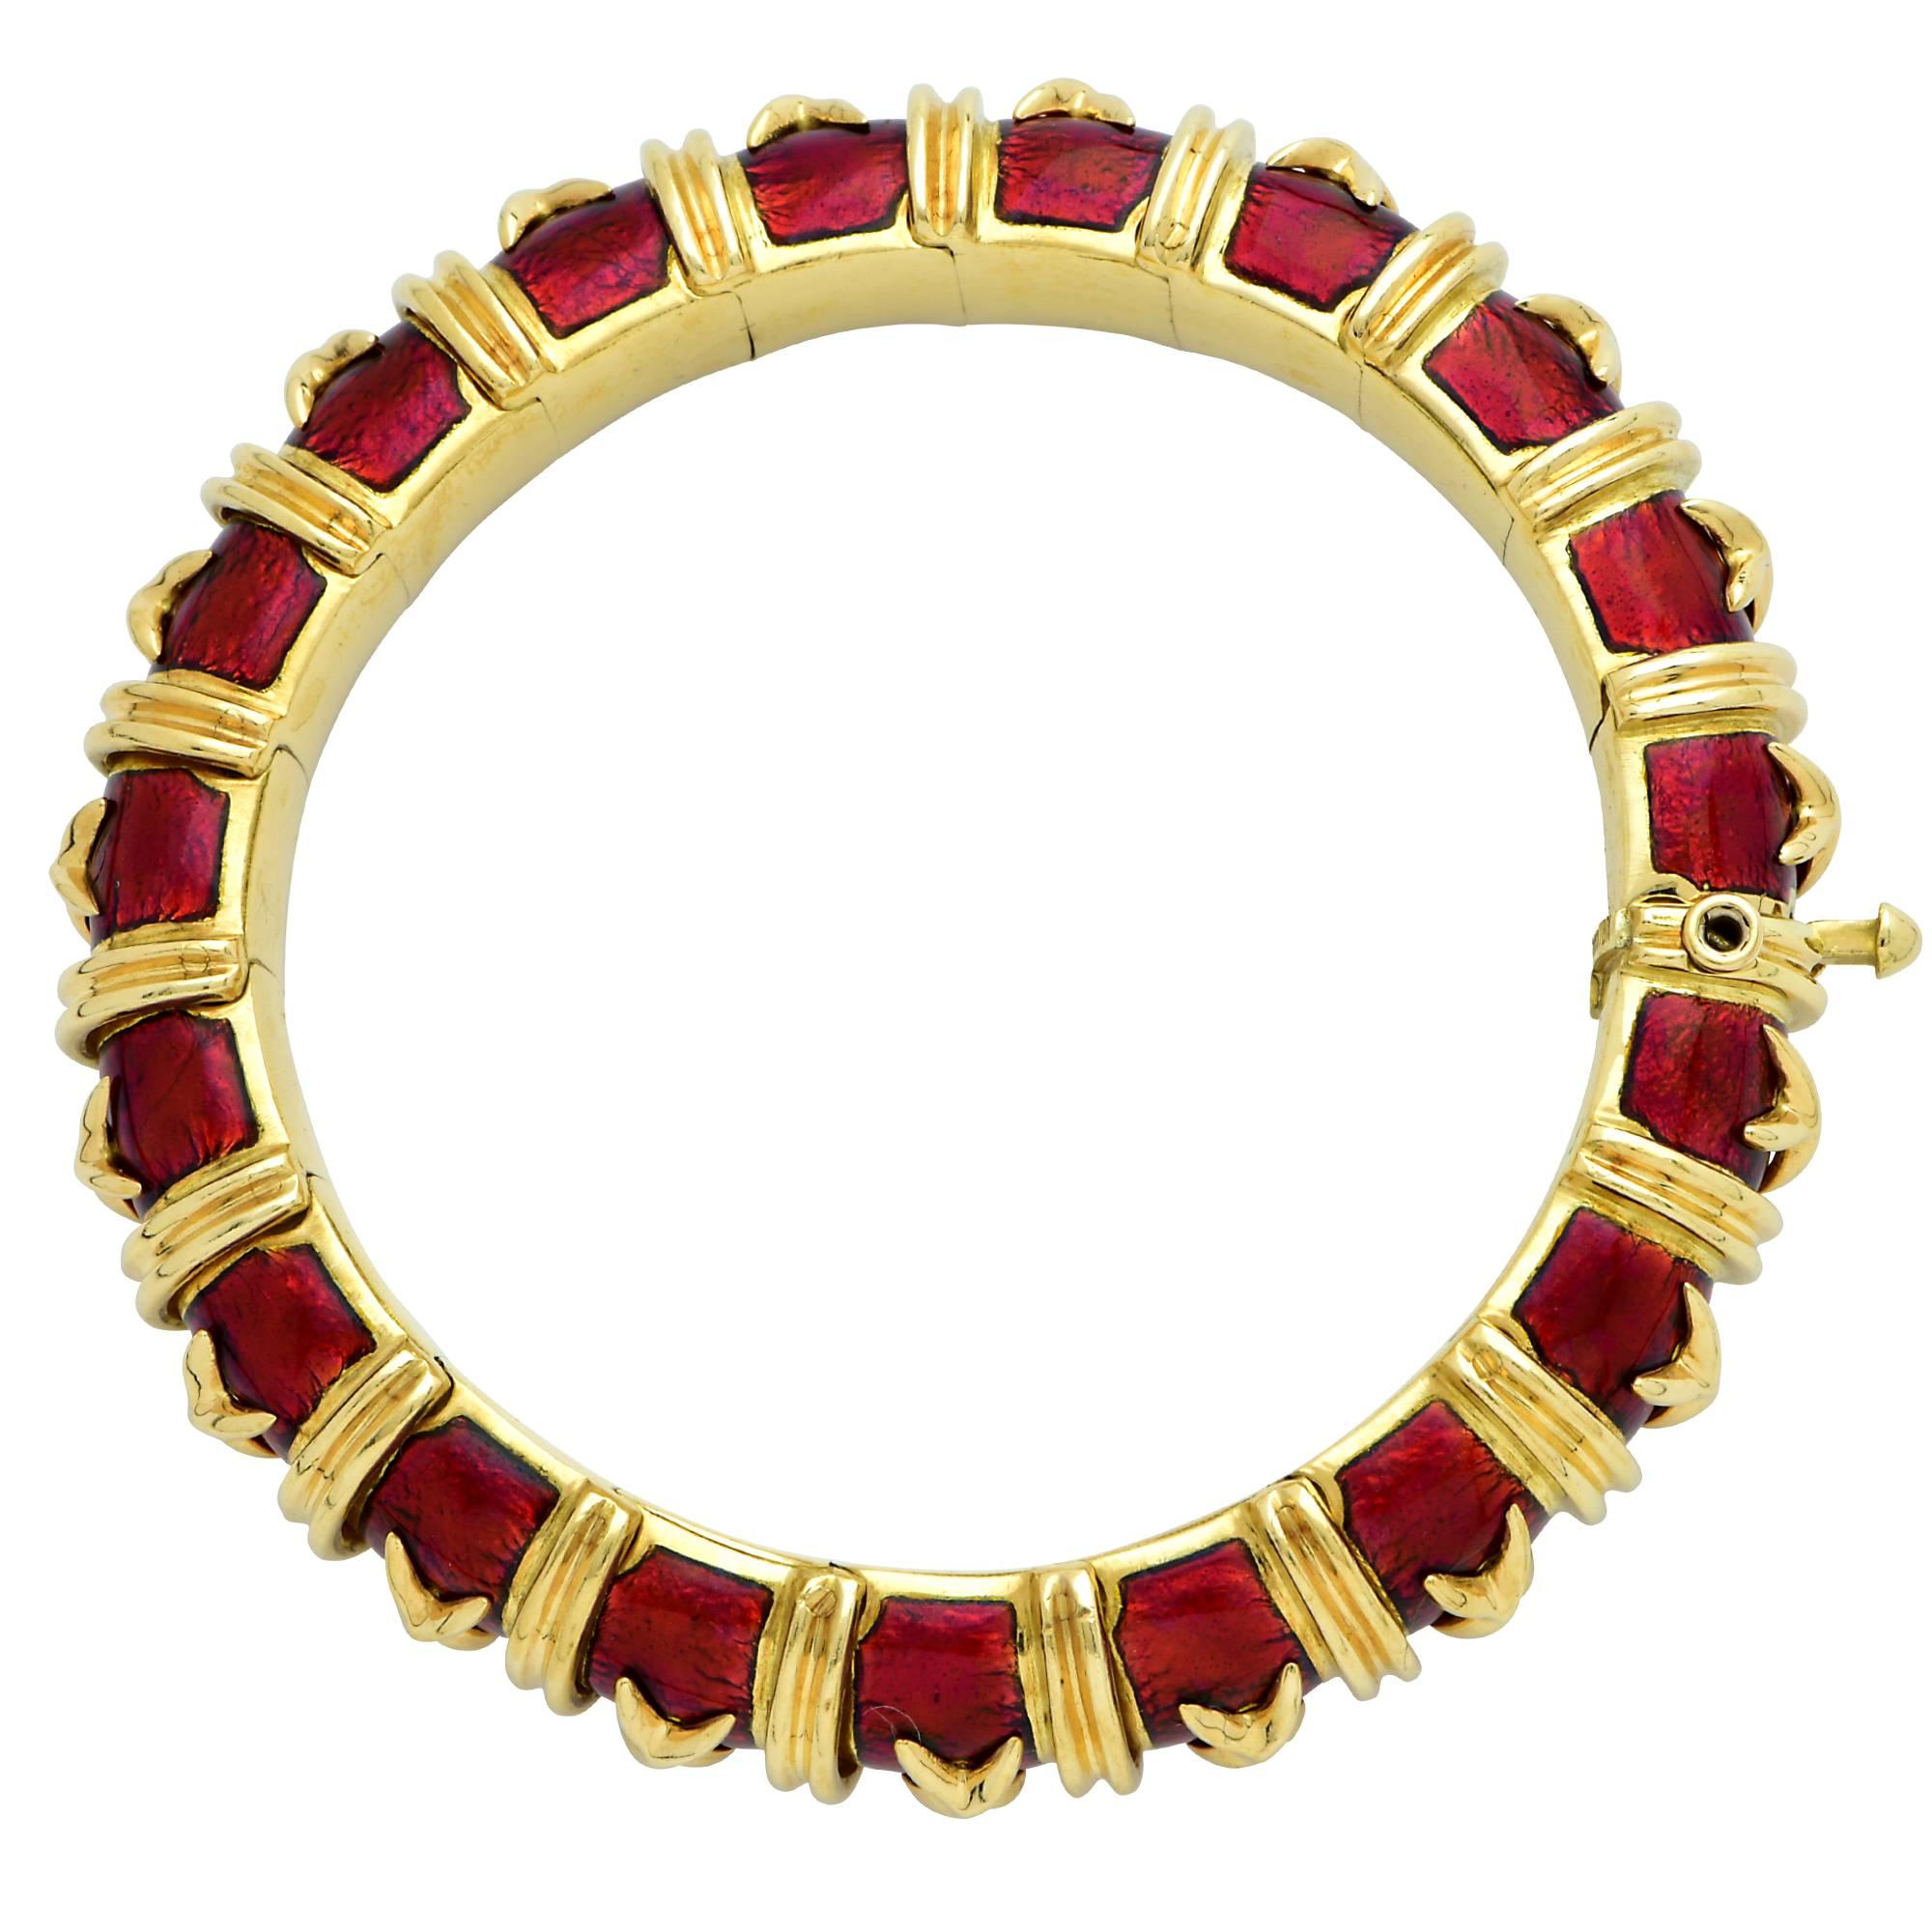 Stunning Tiffany And Co Schlumberger bangle from the crossillion collection, crafted in 18k yellow gold and enriched with Vibrant crimsom red enamel, accented with gold X’s and double piped borders surrounding the entire bracelet. The bracelet